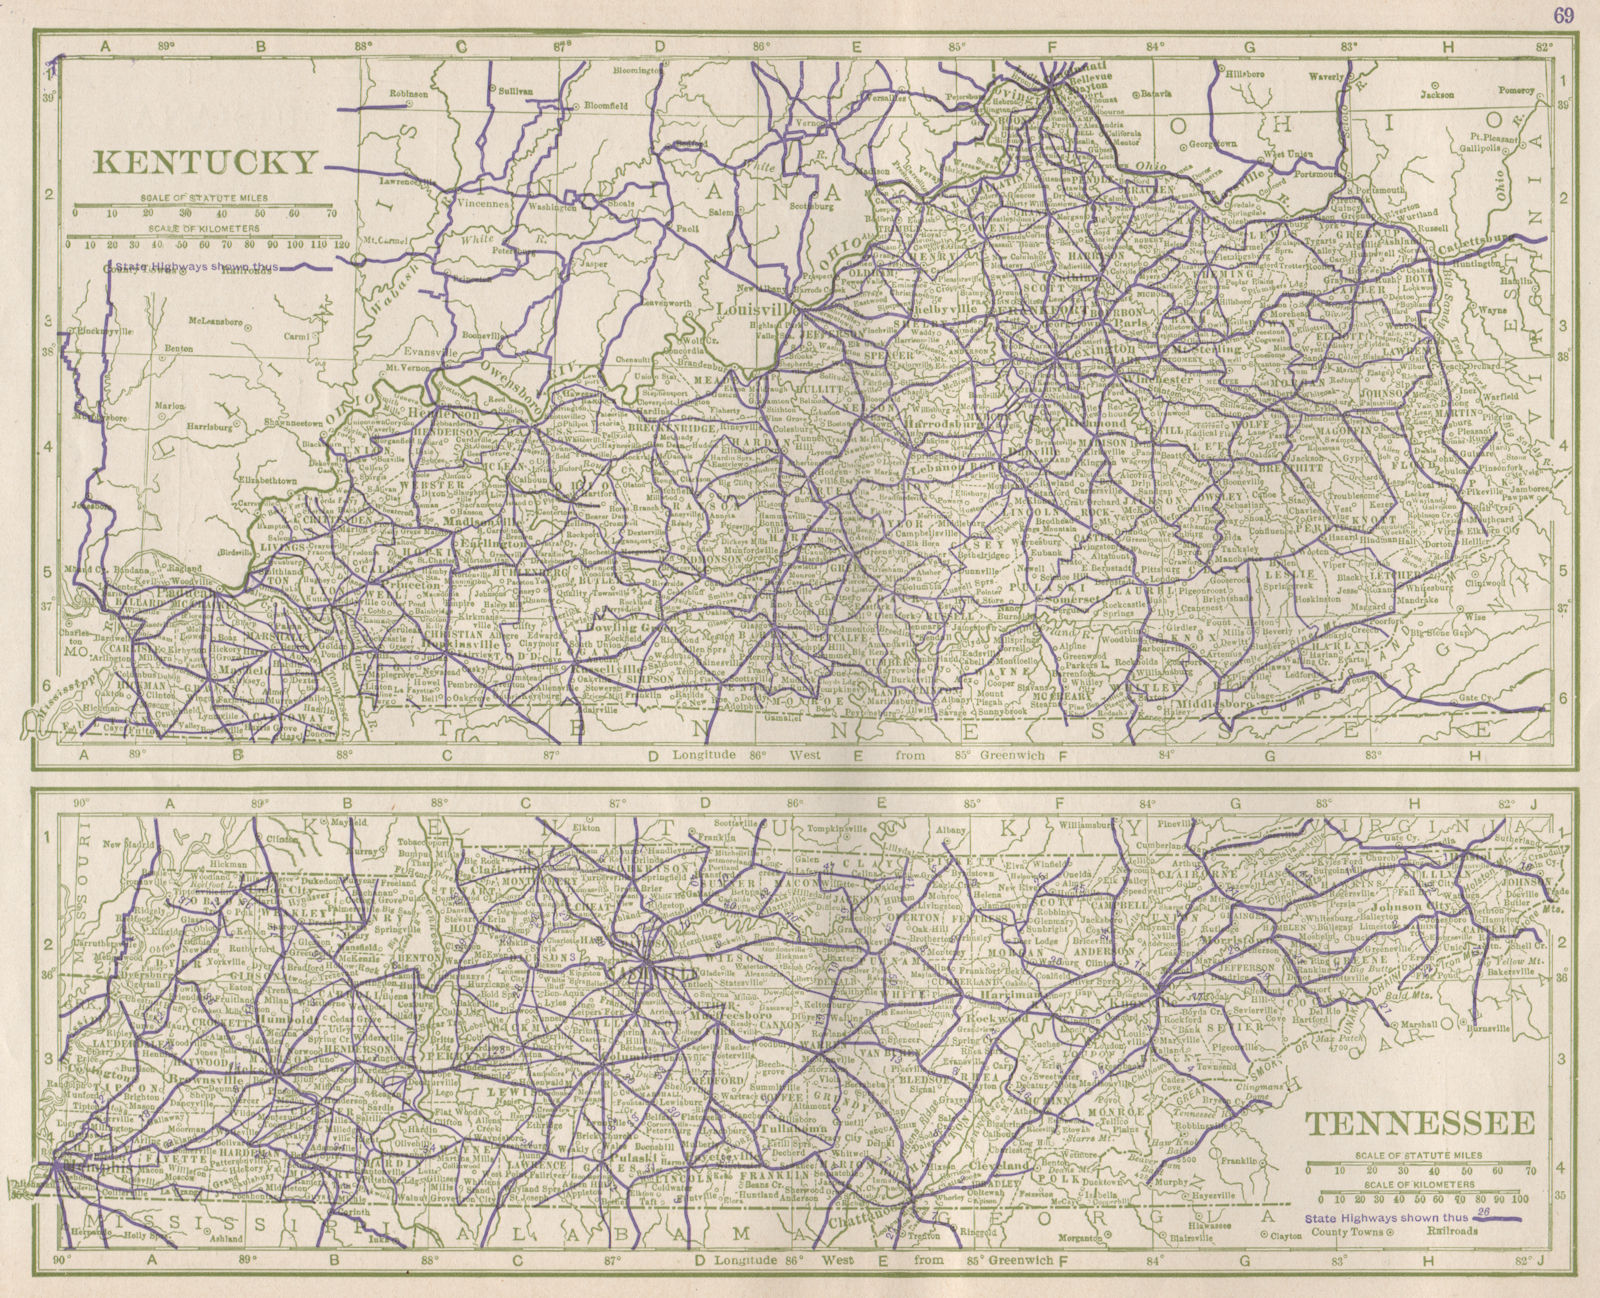 Kentucky & Tennessee State Highways. POATES 1925 old vintage map plan chart